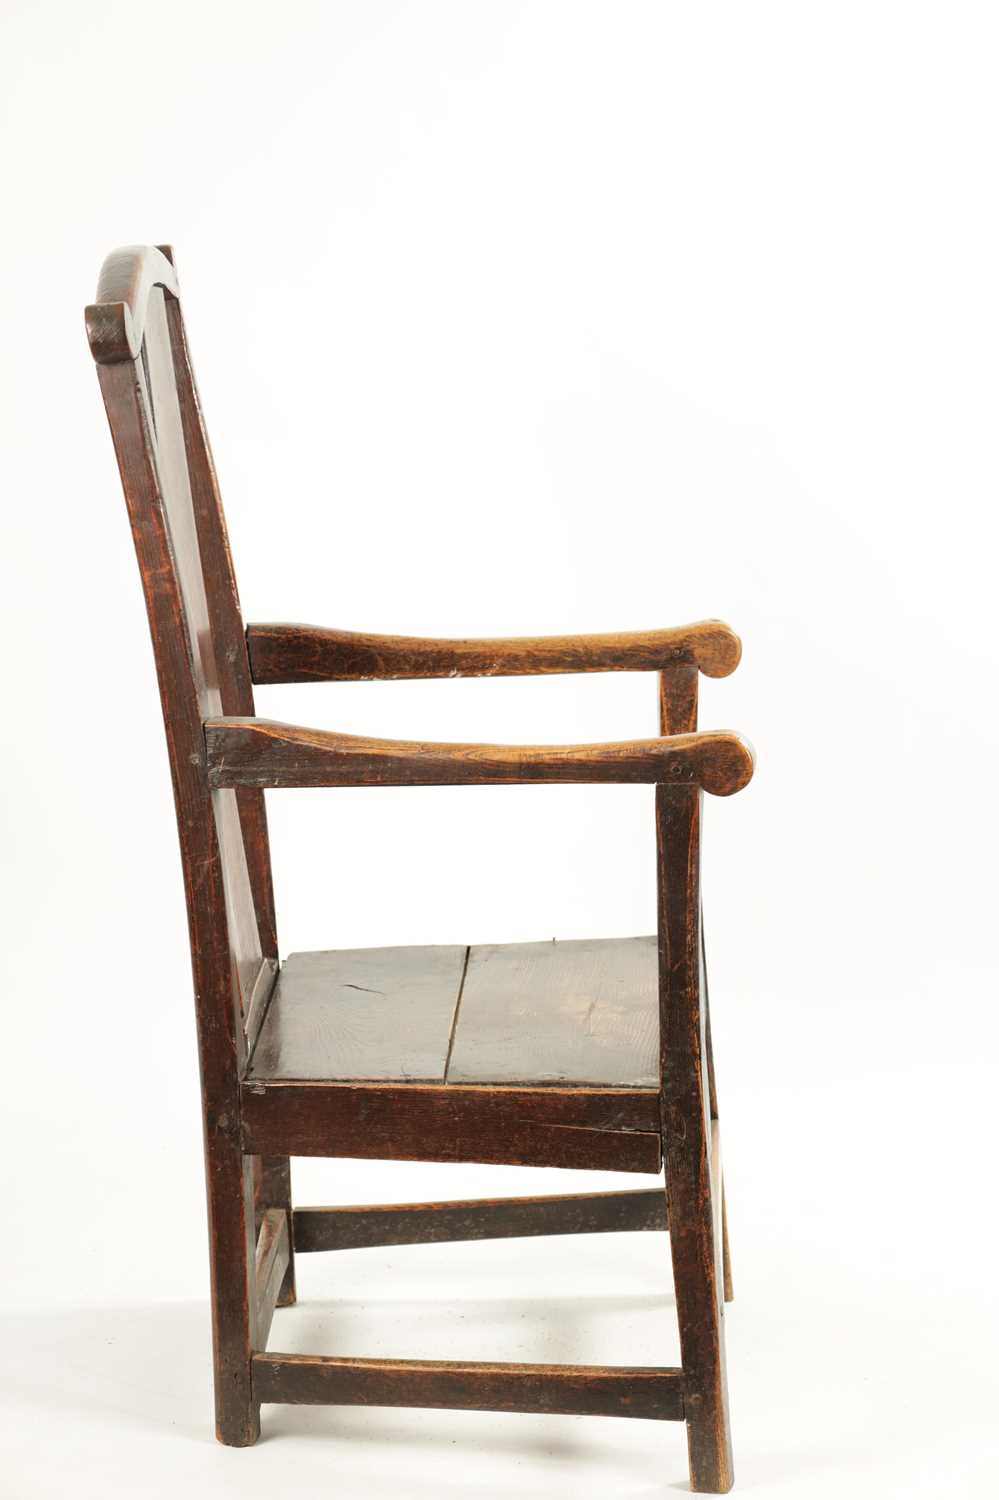 AN 18TH CENTURY PRIMITIVE ASH AND ELM COUNTRY ARMCHAIR - Image 9 of 9